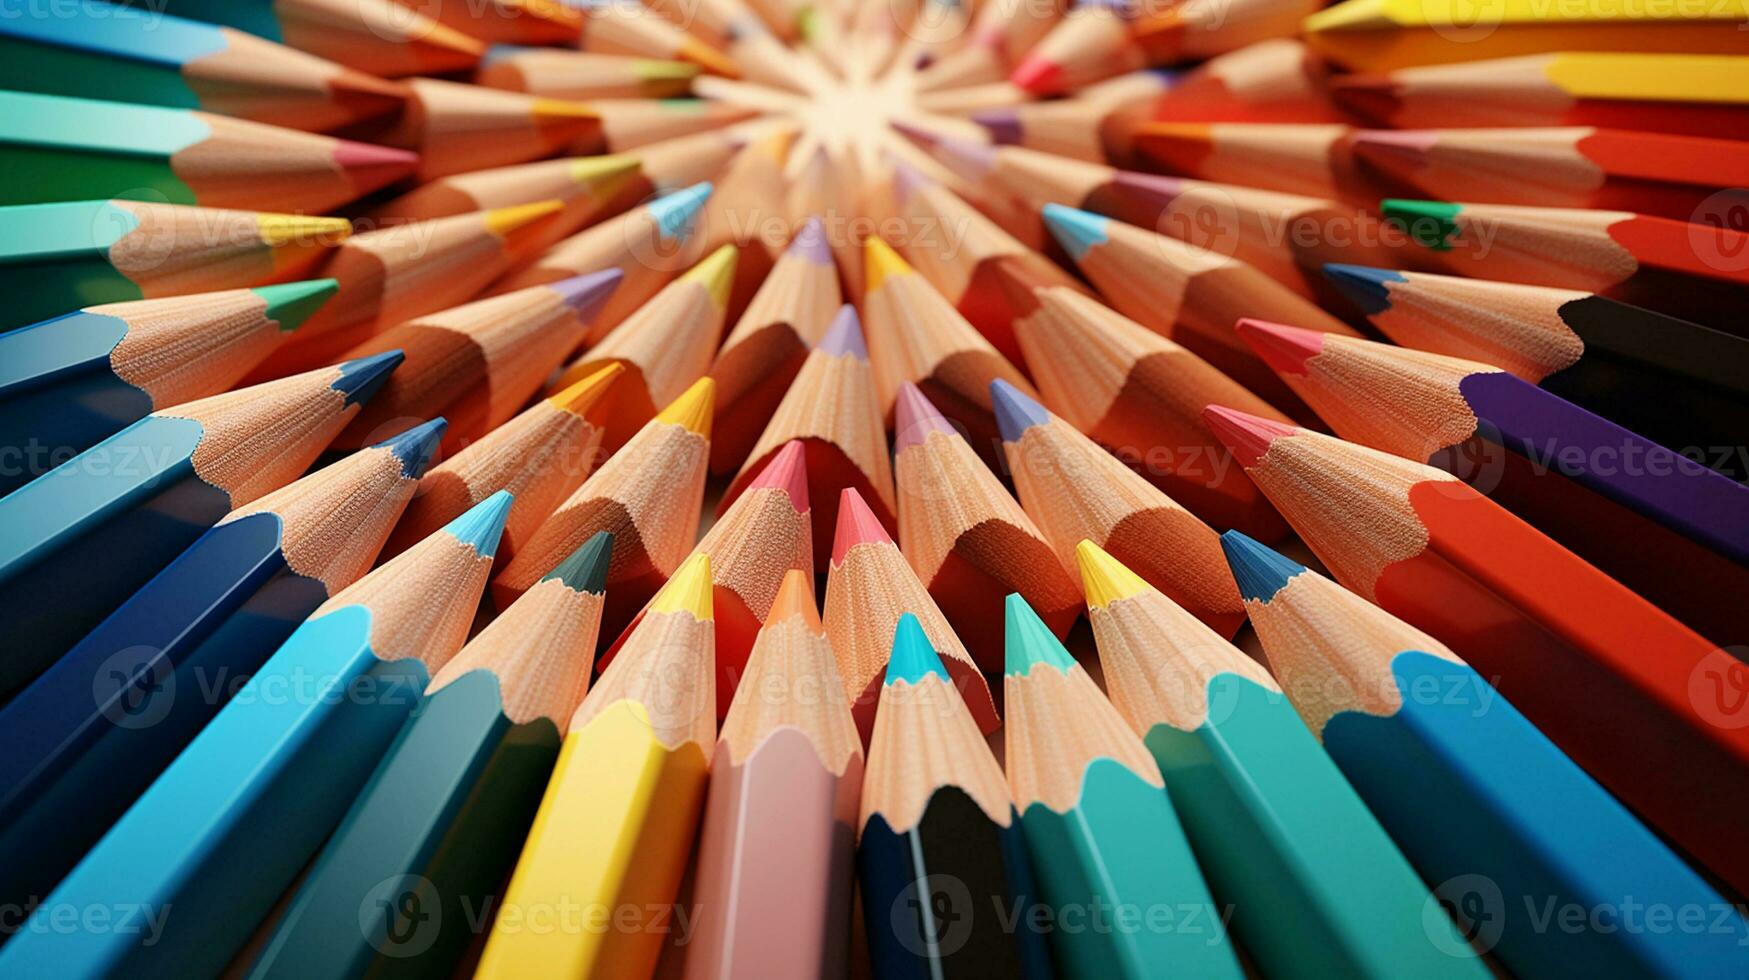 https://static.vecteezy.com/system/resources/previews/030/632/961/non_2x/an-image-of-color-pencils-arranged-in-a-playful-with-space-for-text-whimsical-pattern-on-a-textured-surface-inviting-viewers-to-explore-their-own-creative-imagination-ai-generated-photo.jpg